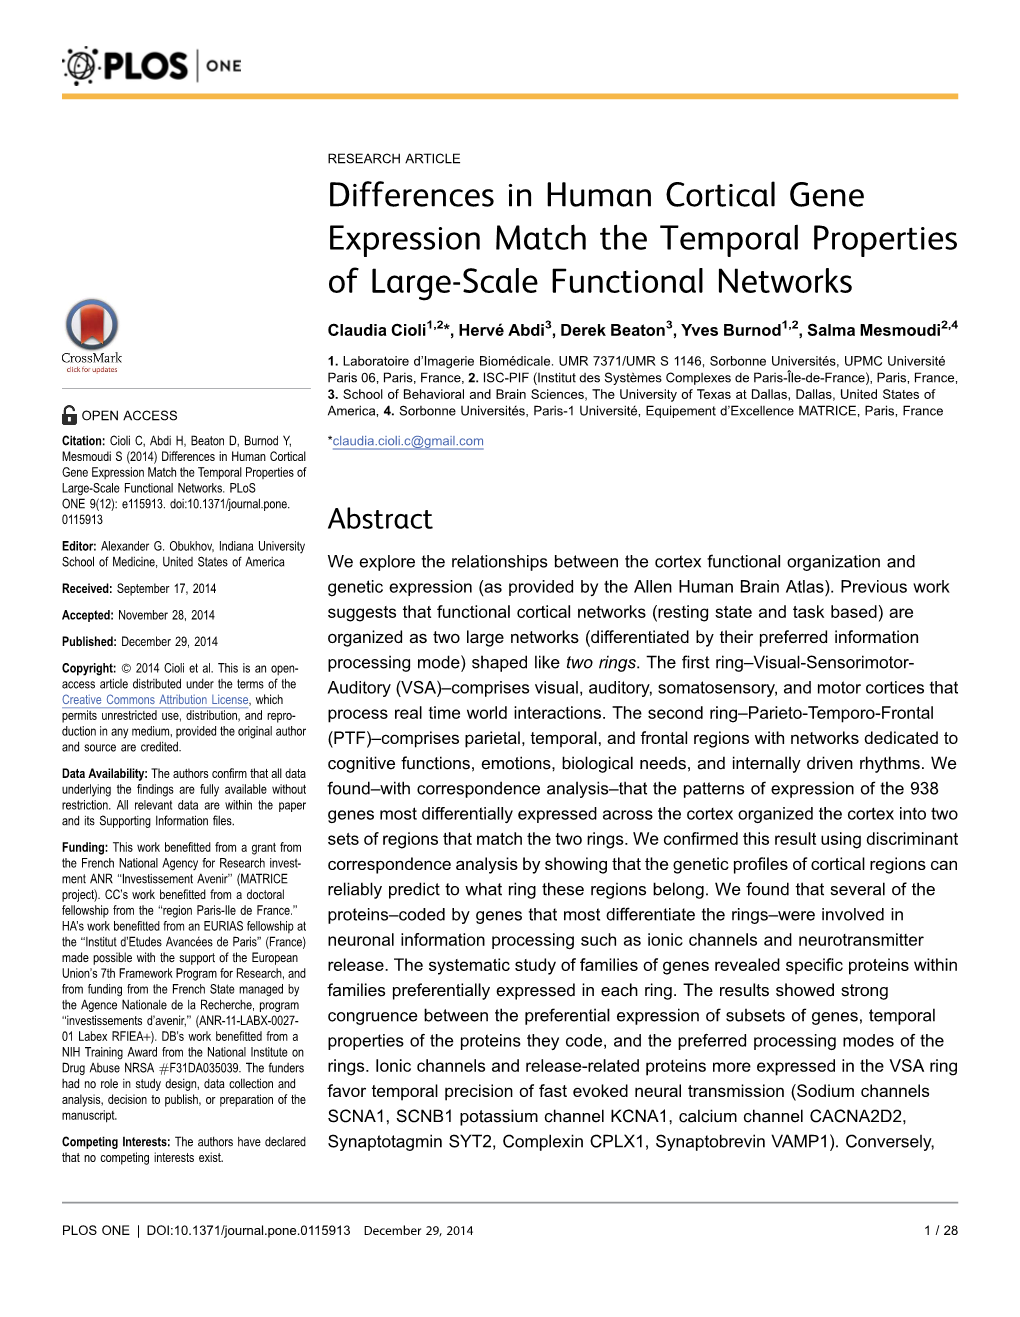 Human Cortical Gene Expression and Properties of Functional Networks